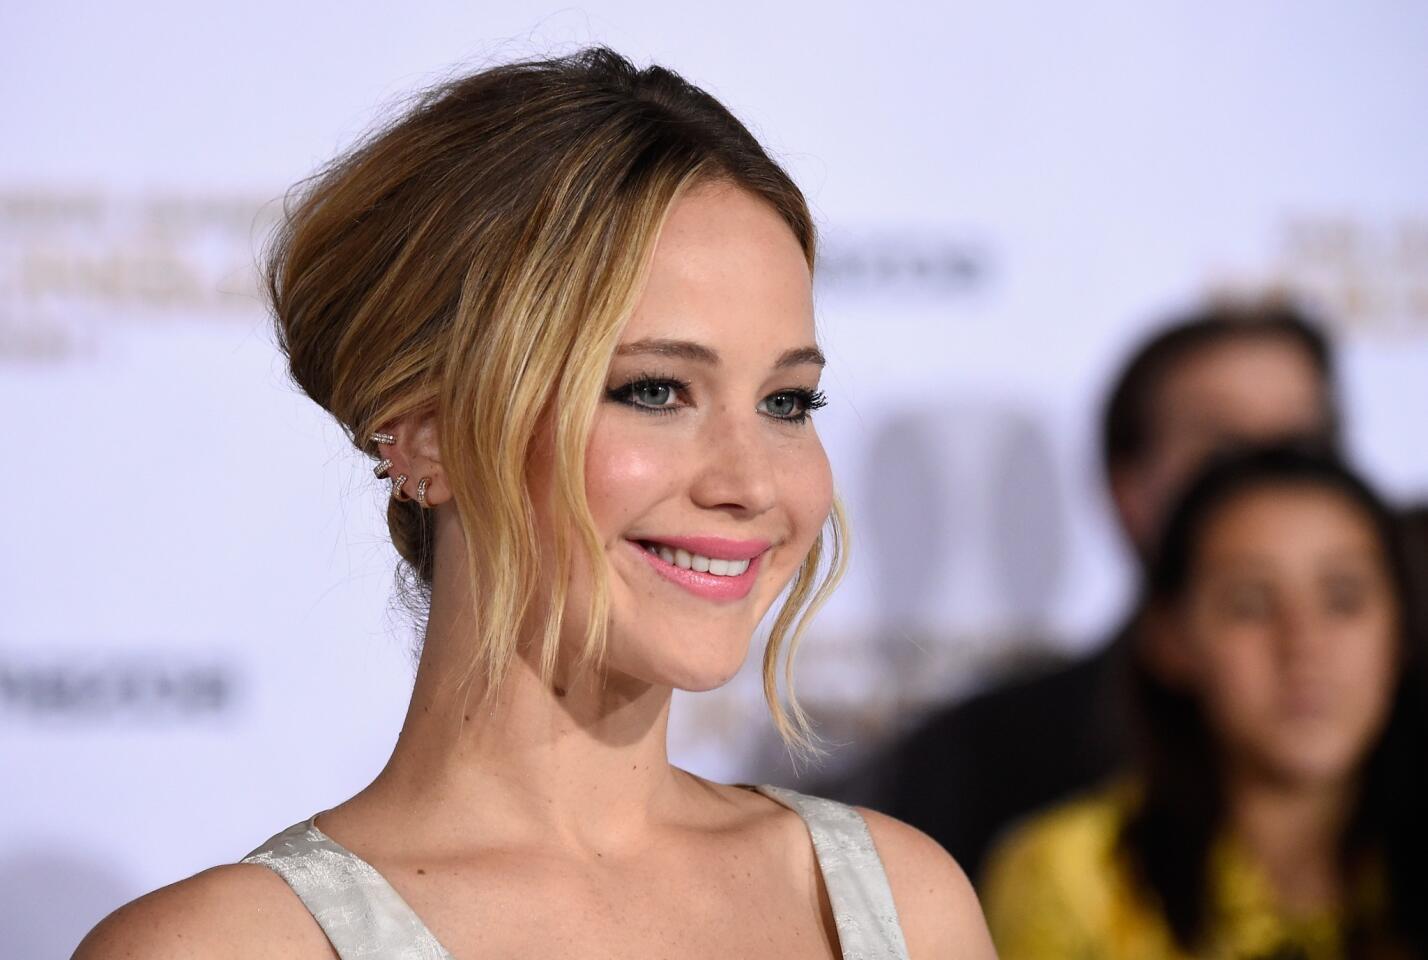 Jennifer Lawrence attends the Los Angeles premiere of "The Hunger Games: Mockingjay -- Part 1."